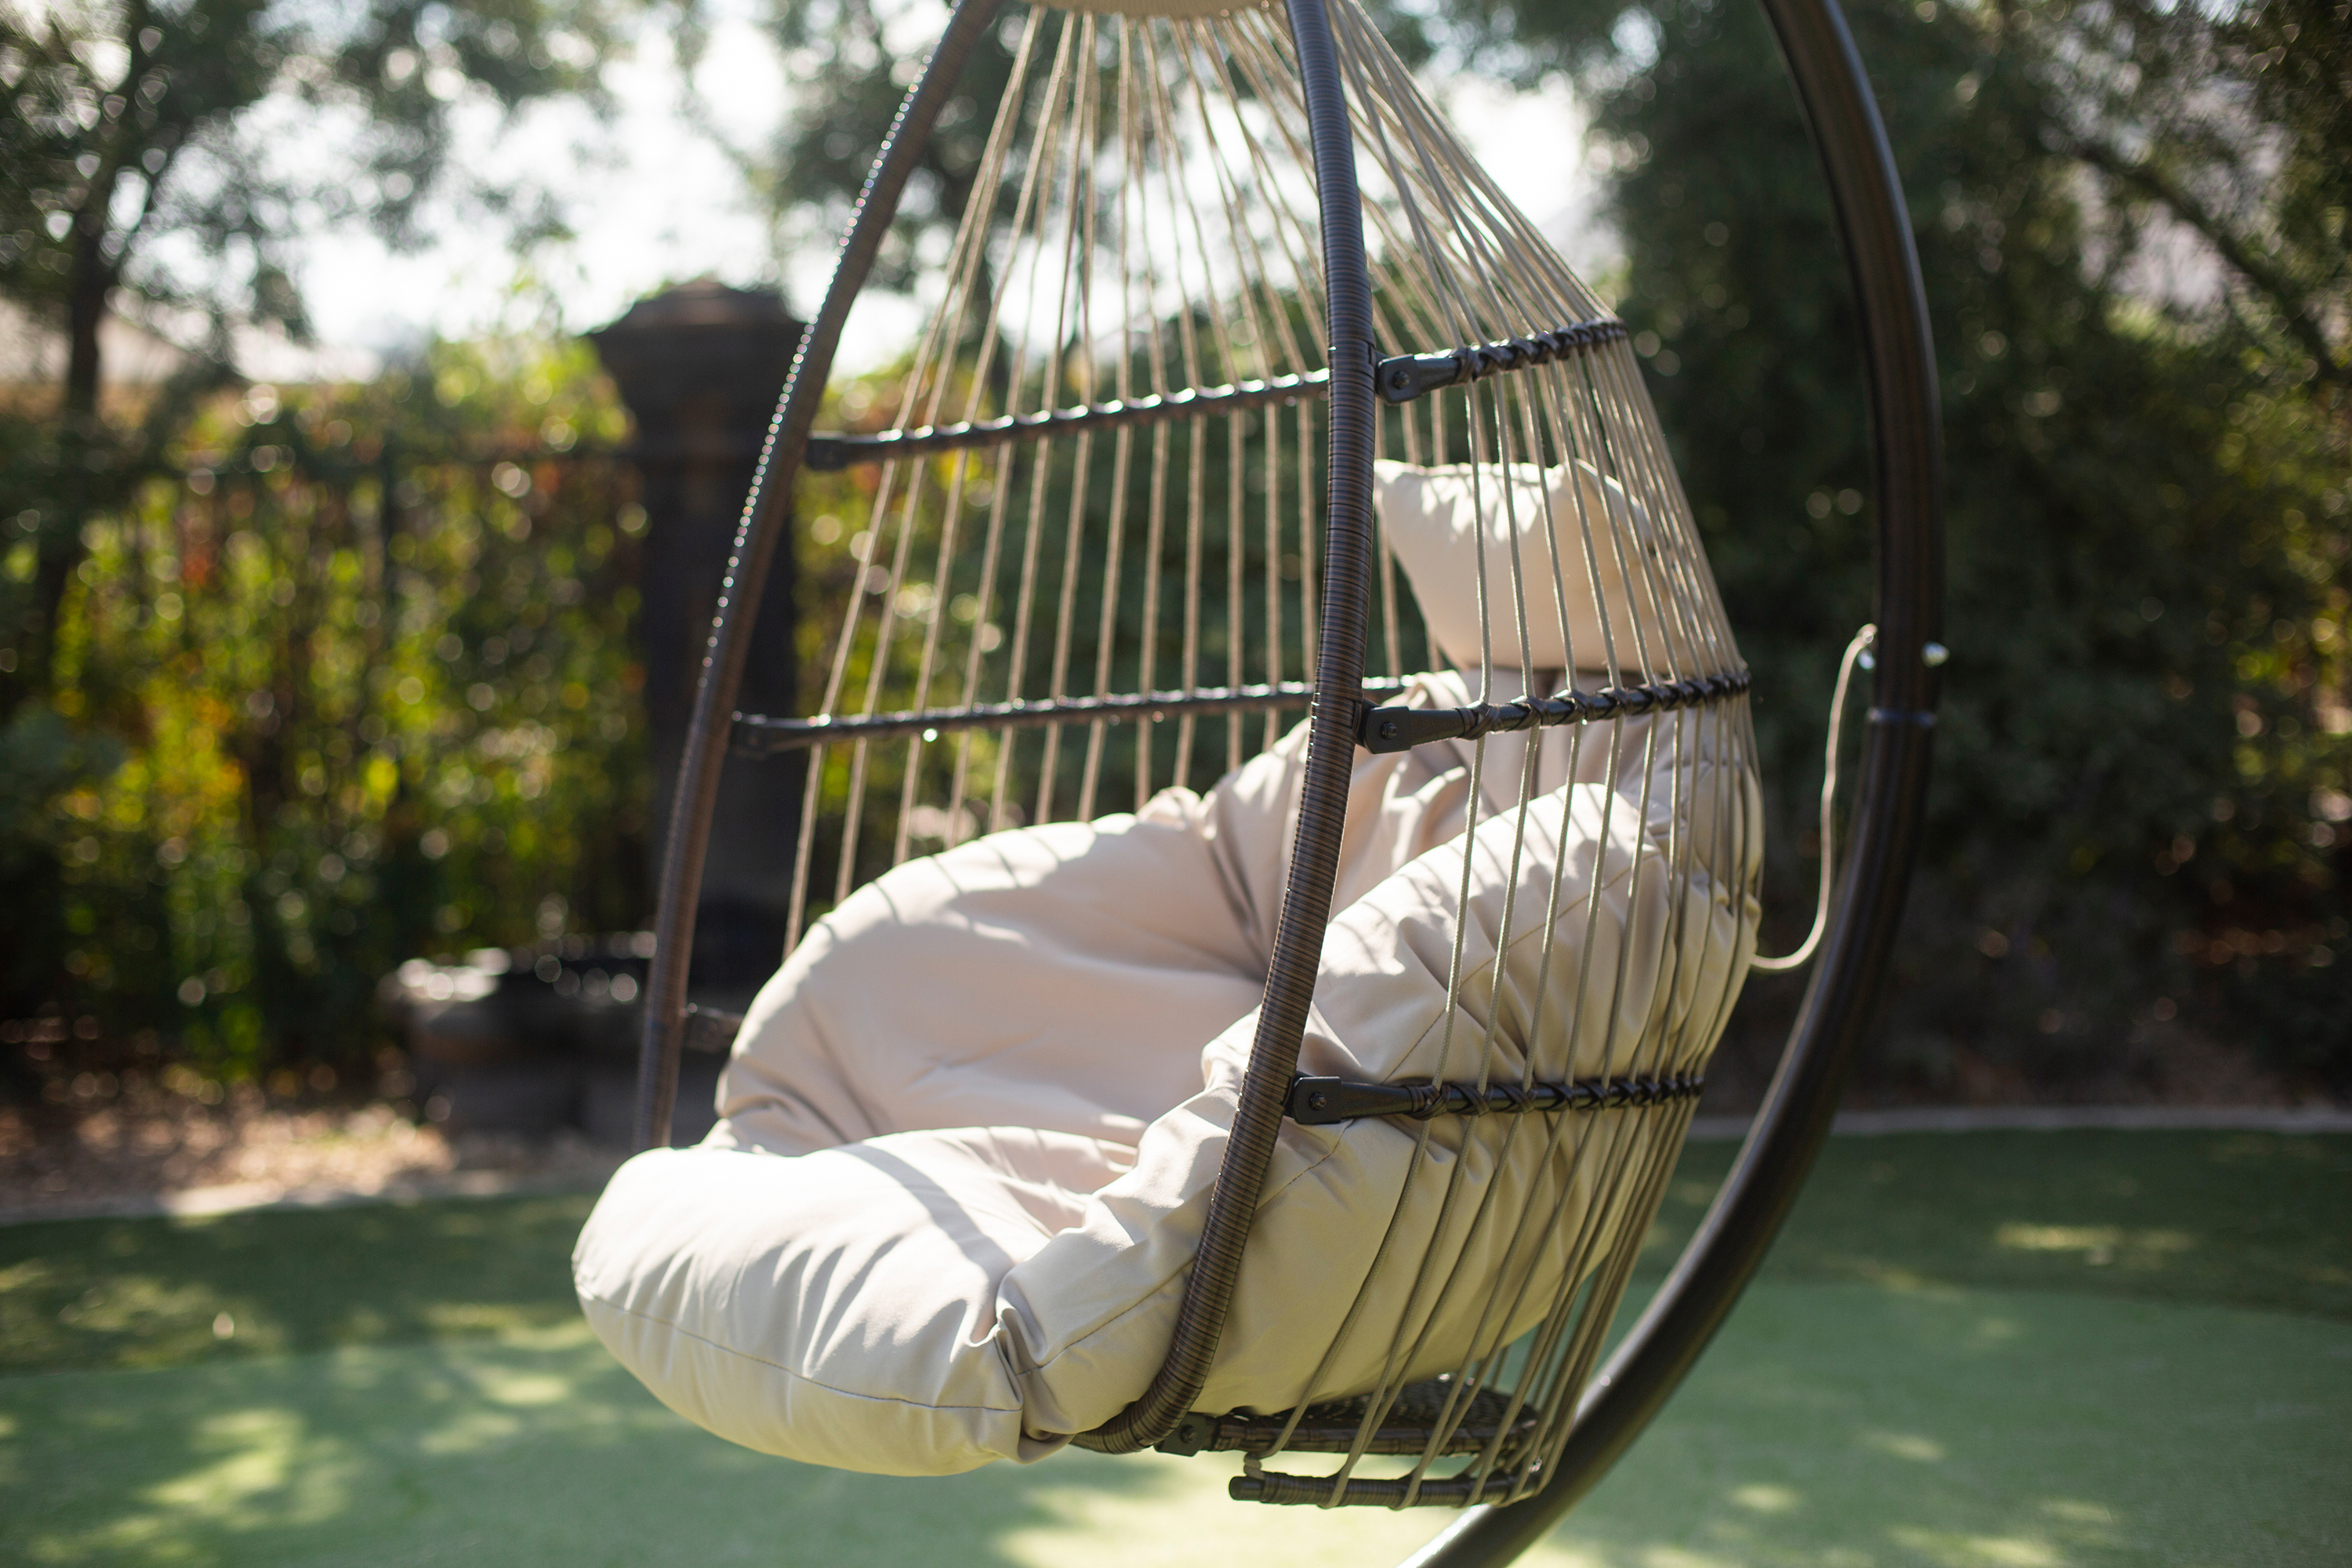 Barton Hanging Egg Swing Chair UV-Resistant Soft Cushion Large Basket Patio Seating, Beige - image 5 of 7